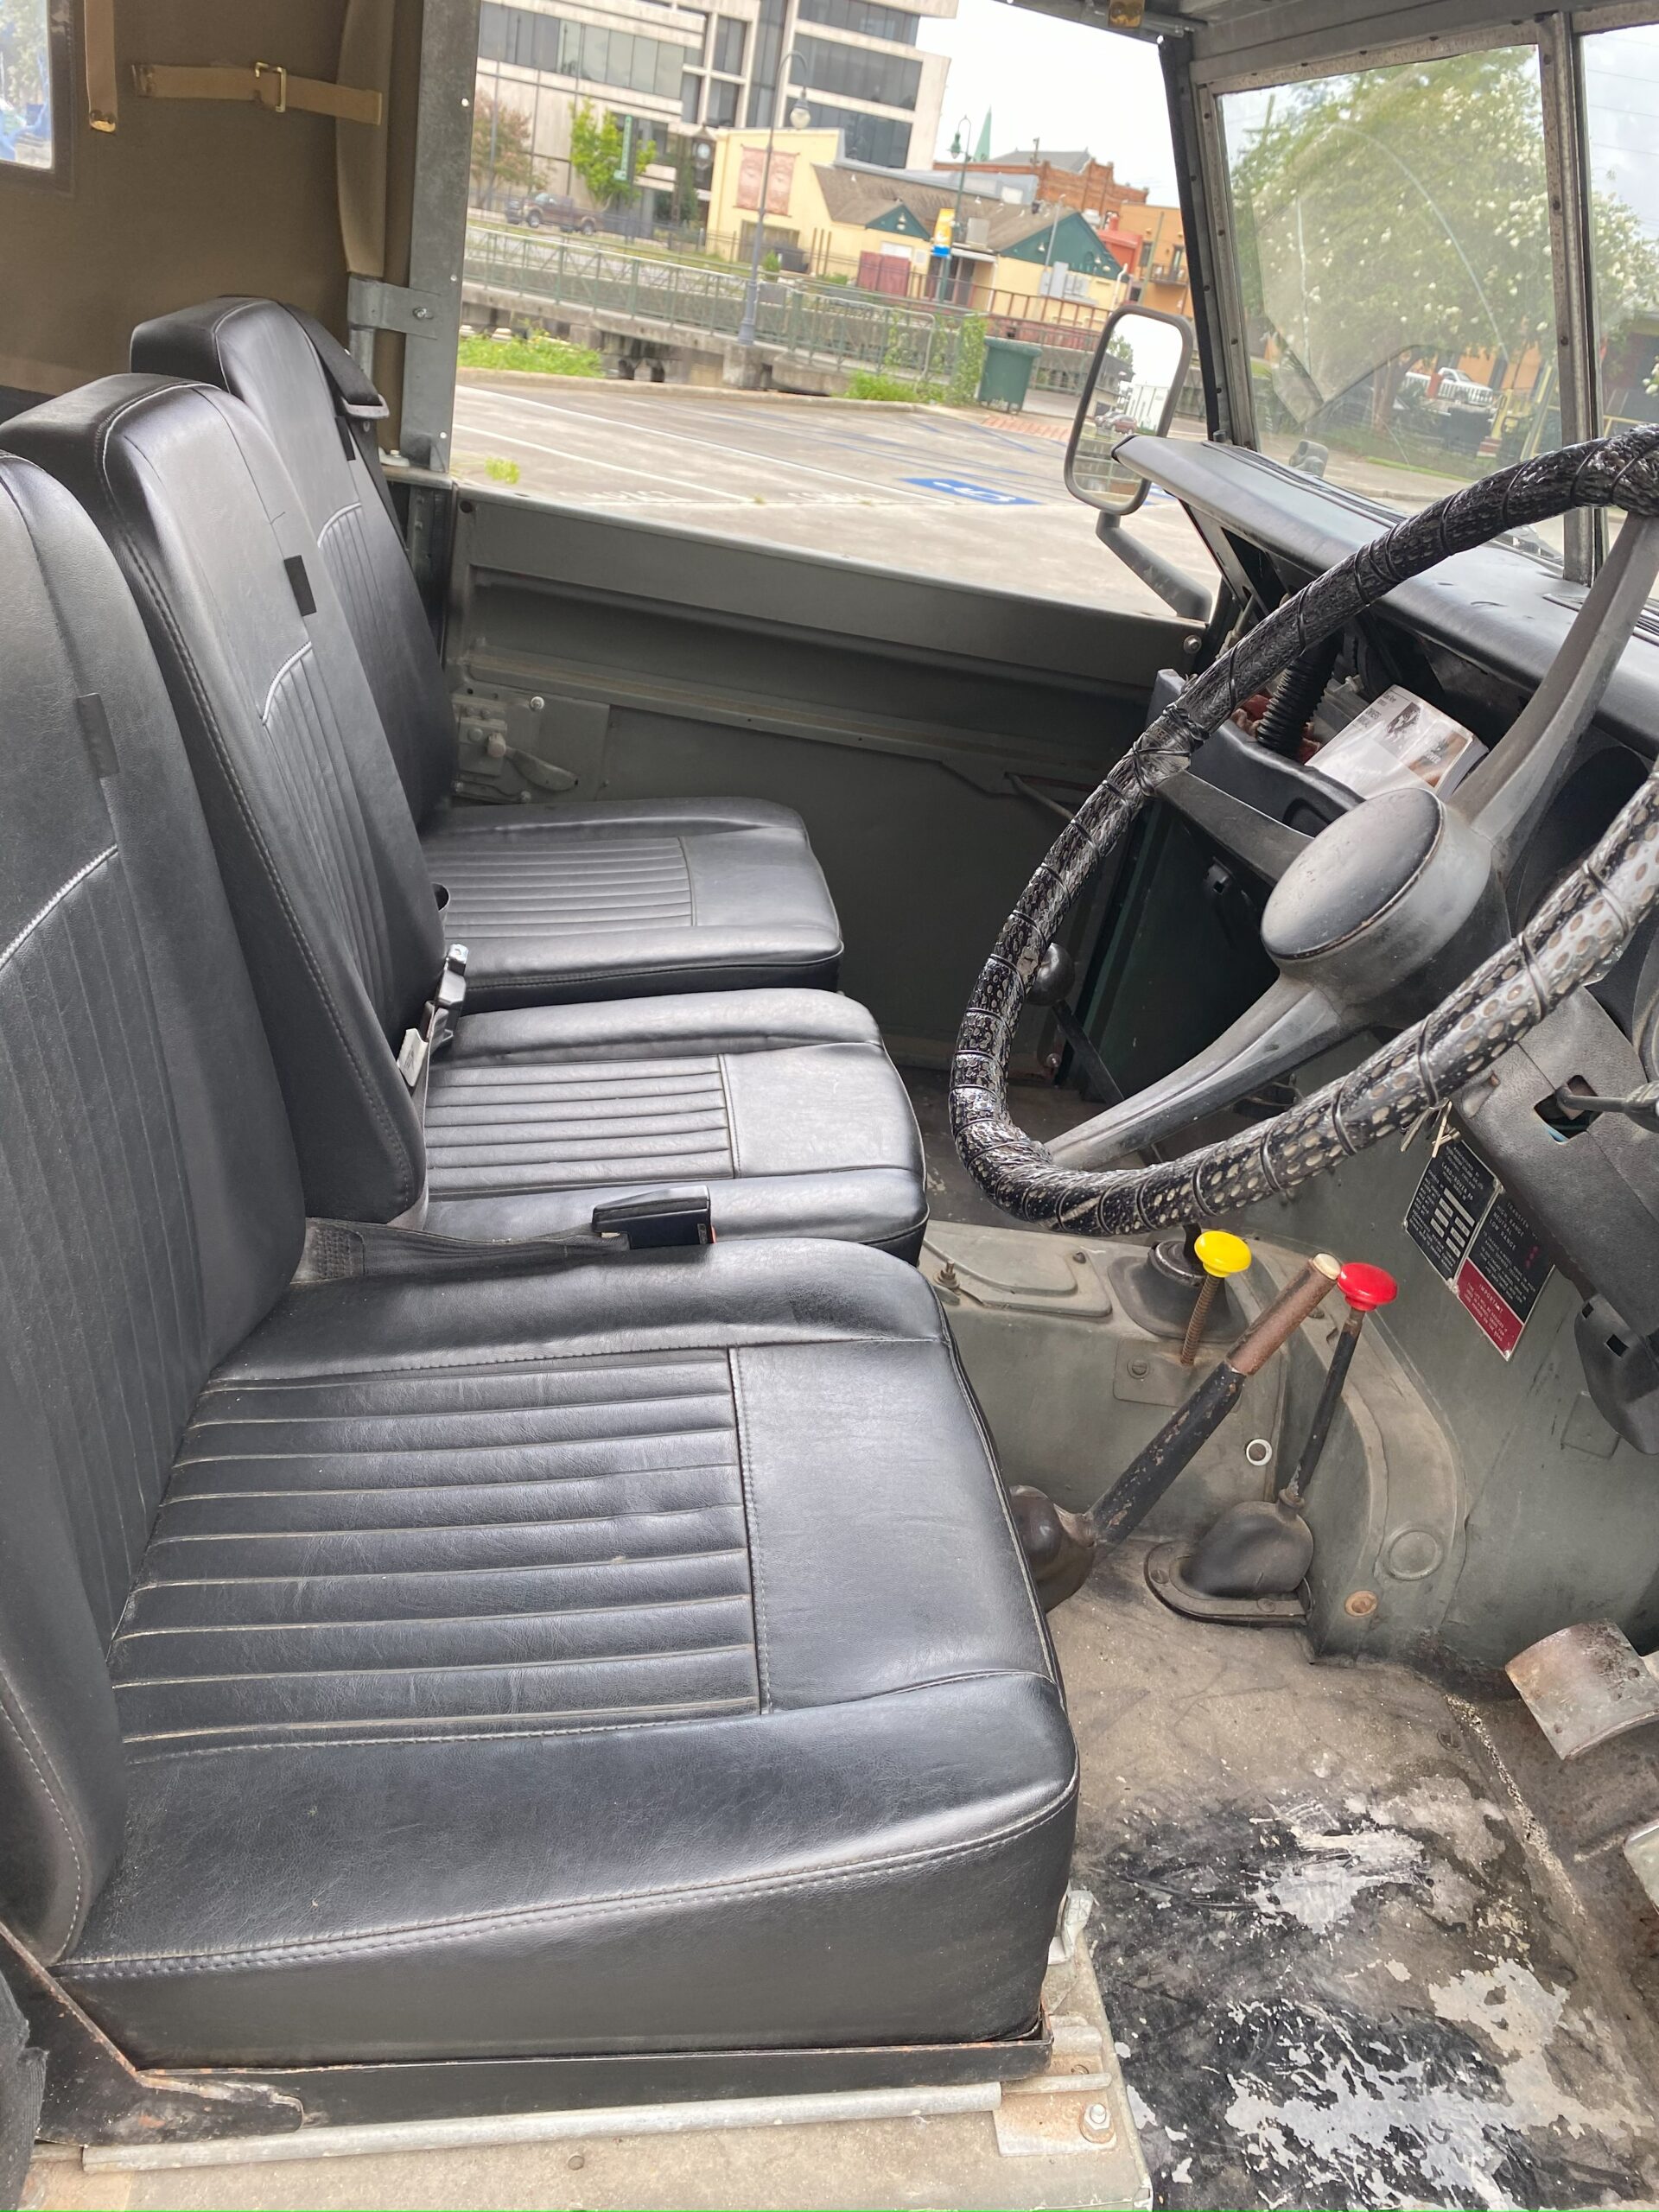 1974 LANDROVER SERIES 3 – EMBRACE THE CHAOS!